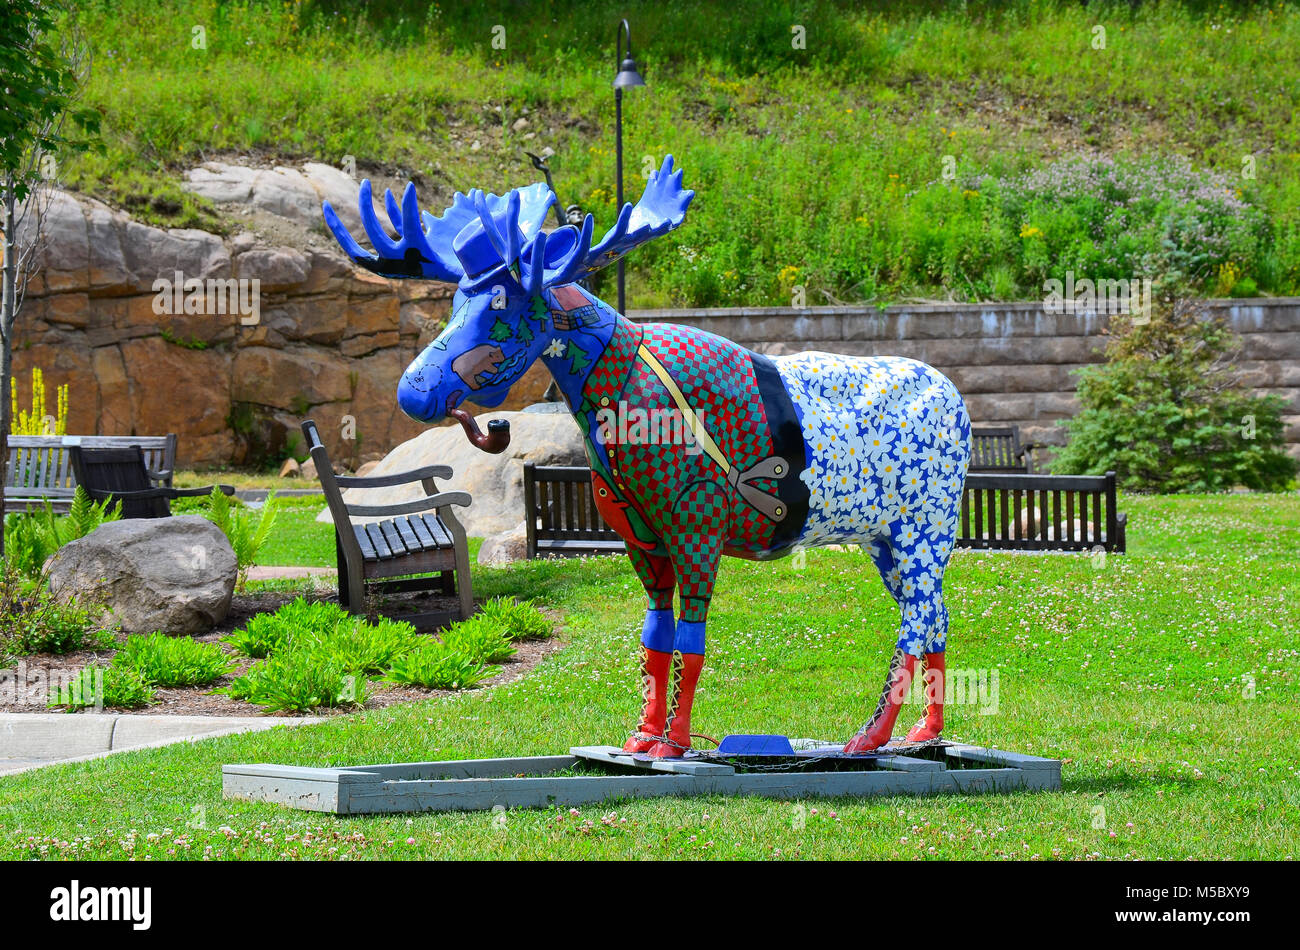 A statue of an artistic moose named 'Url' the the View - the Art Center, Old Forge, NY USA, a gift to the View and decorated by area students. Stock Photo